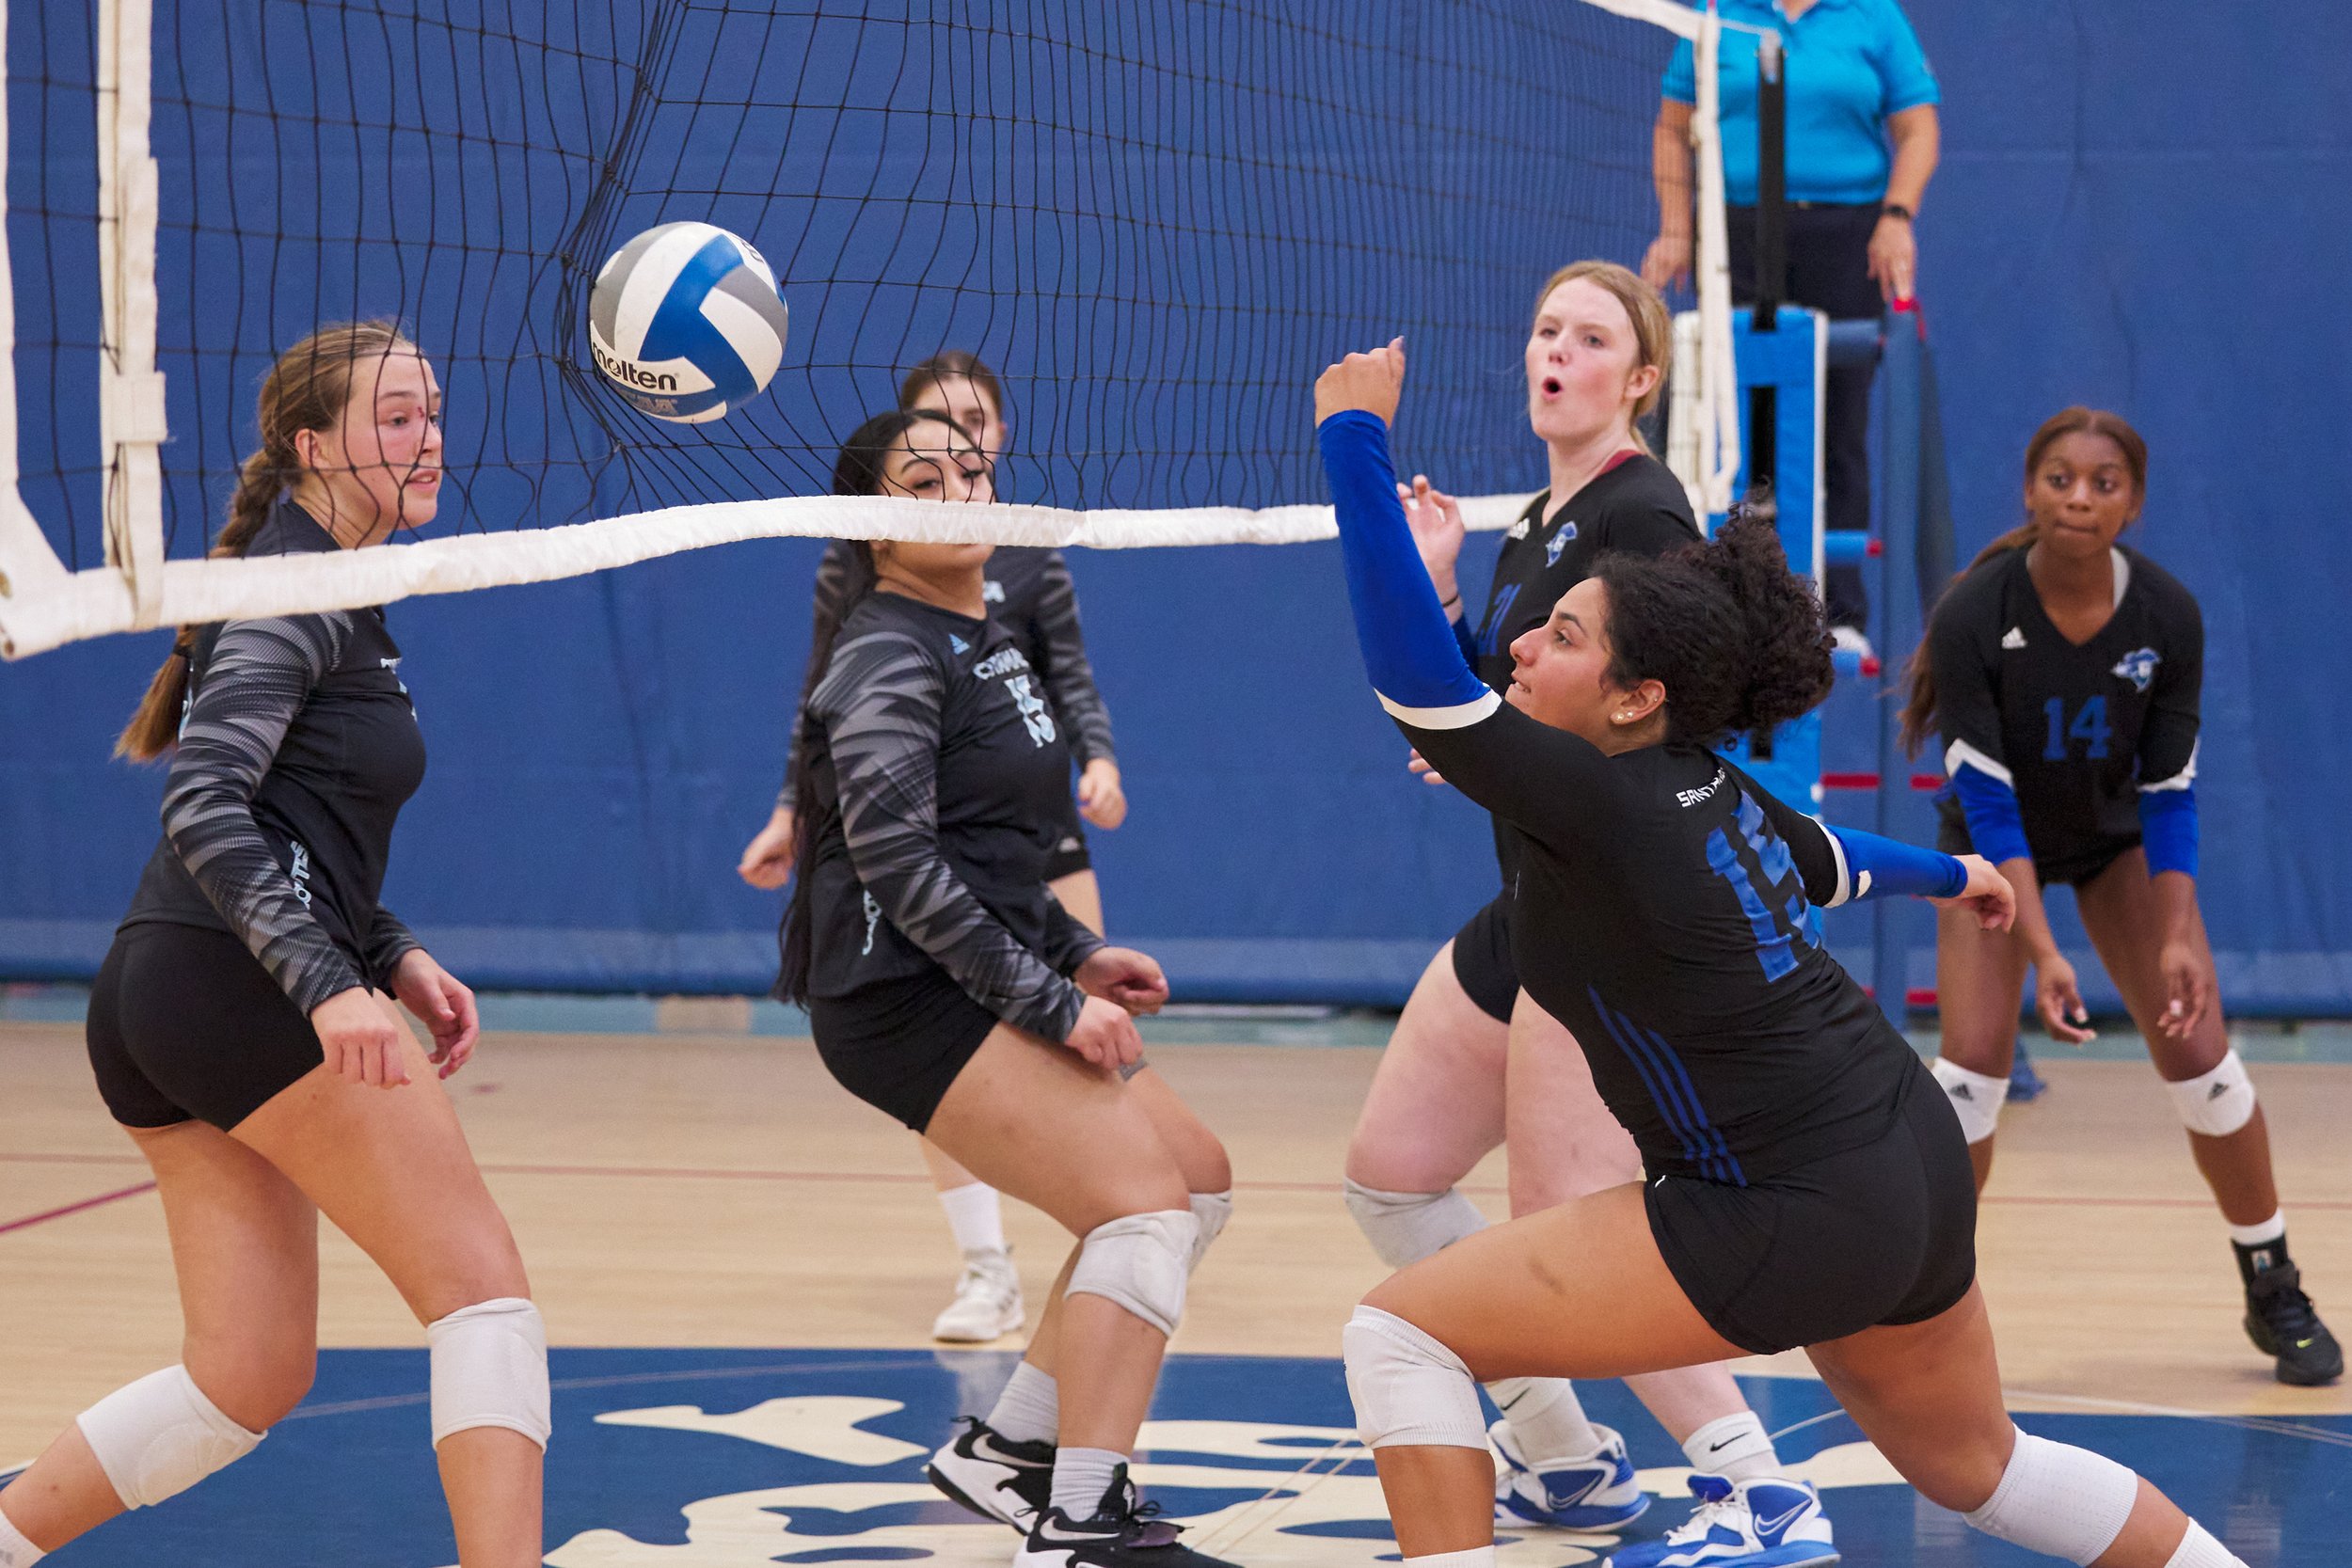  Santa Monica College Corsairs' Jaylynn Fierro (bottom right) saves the ball, only to send it into the net, during the women's volleyball match against the Cuyamaca College Coyotes on Wednesday, Sept. 6, 2023, at the SMC Gym in Santa Monica, Calif. T